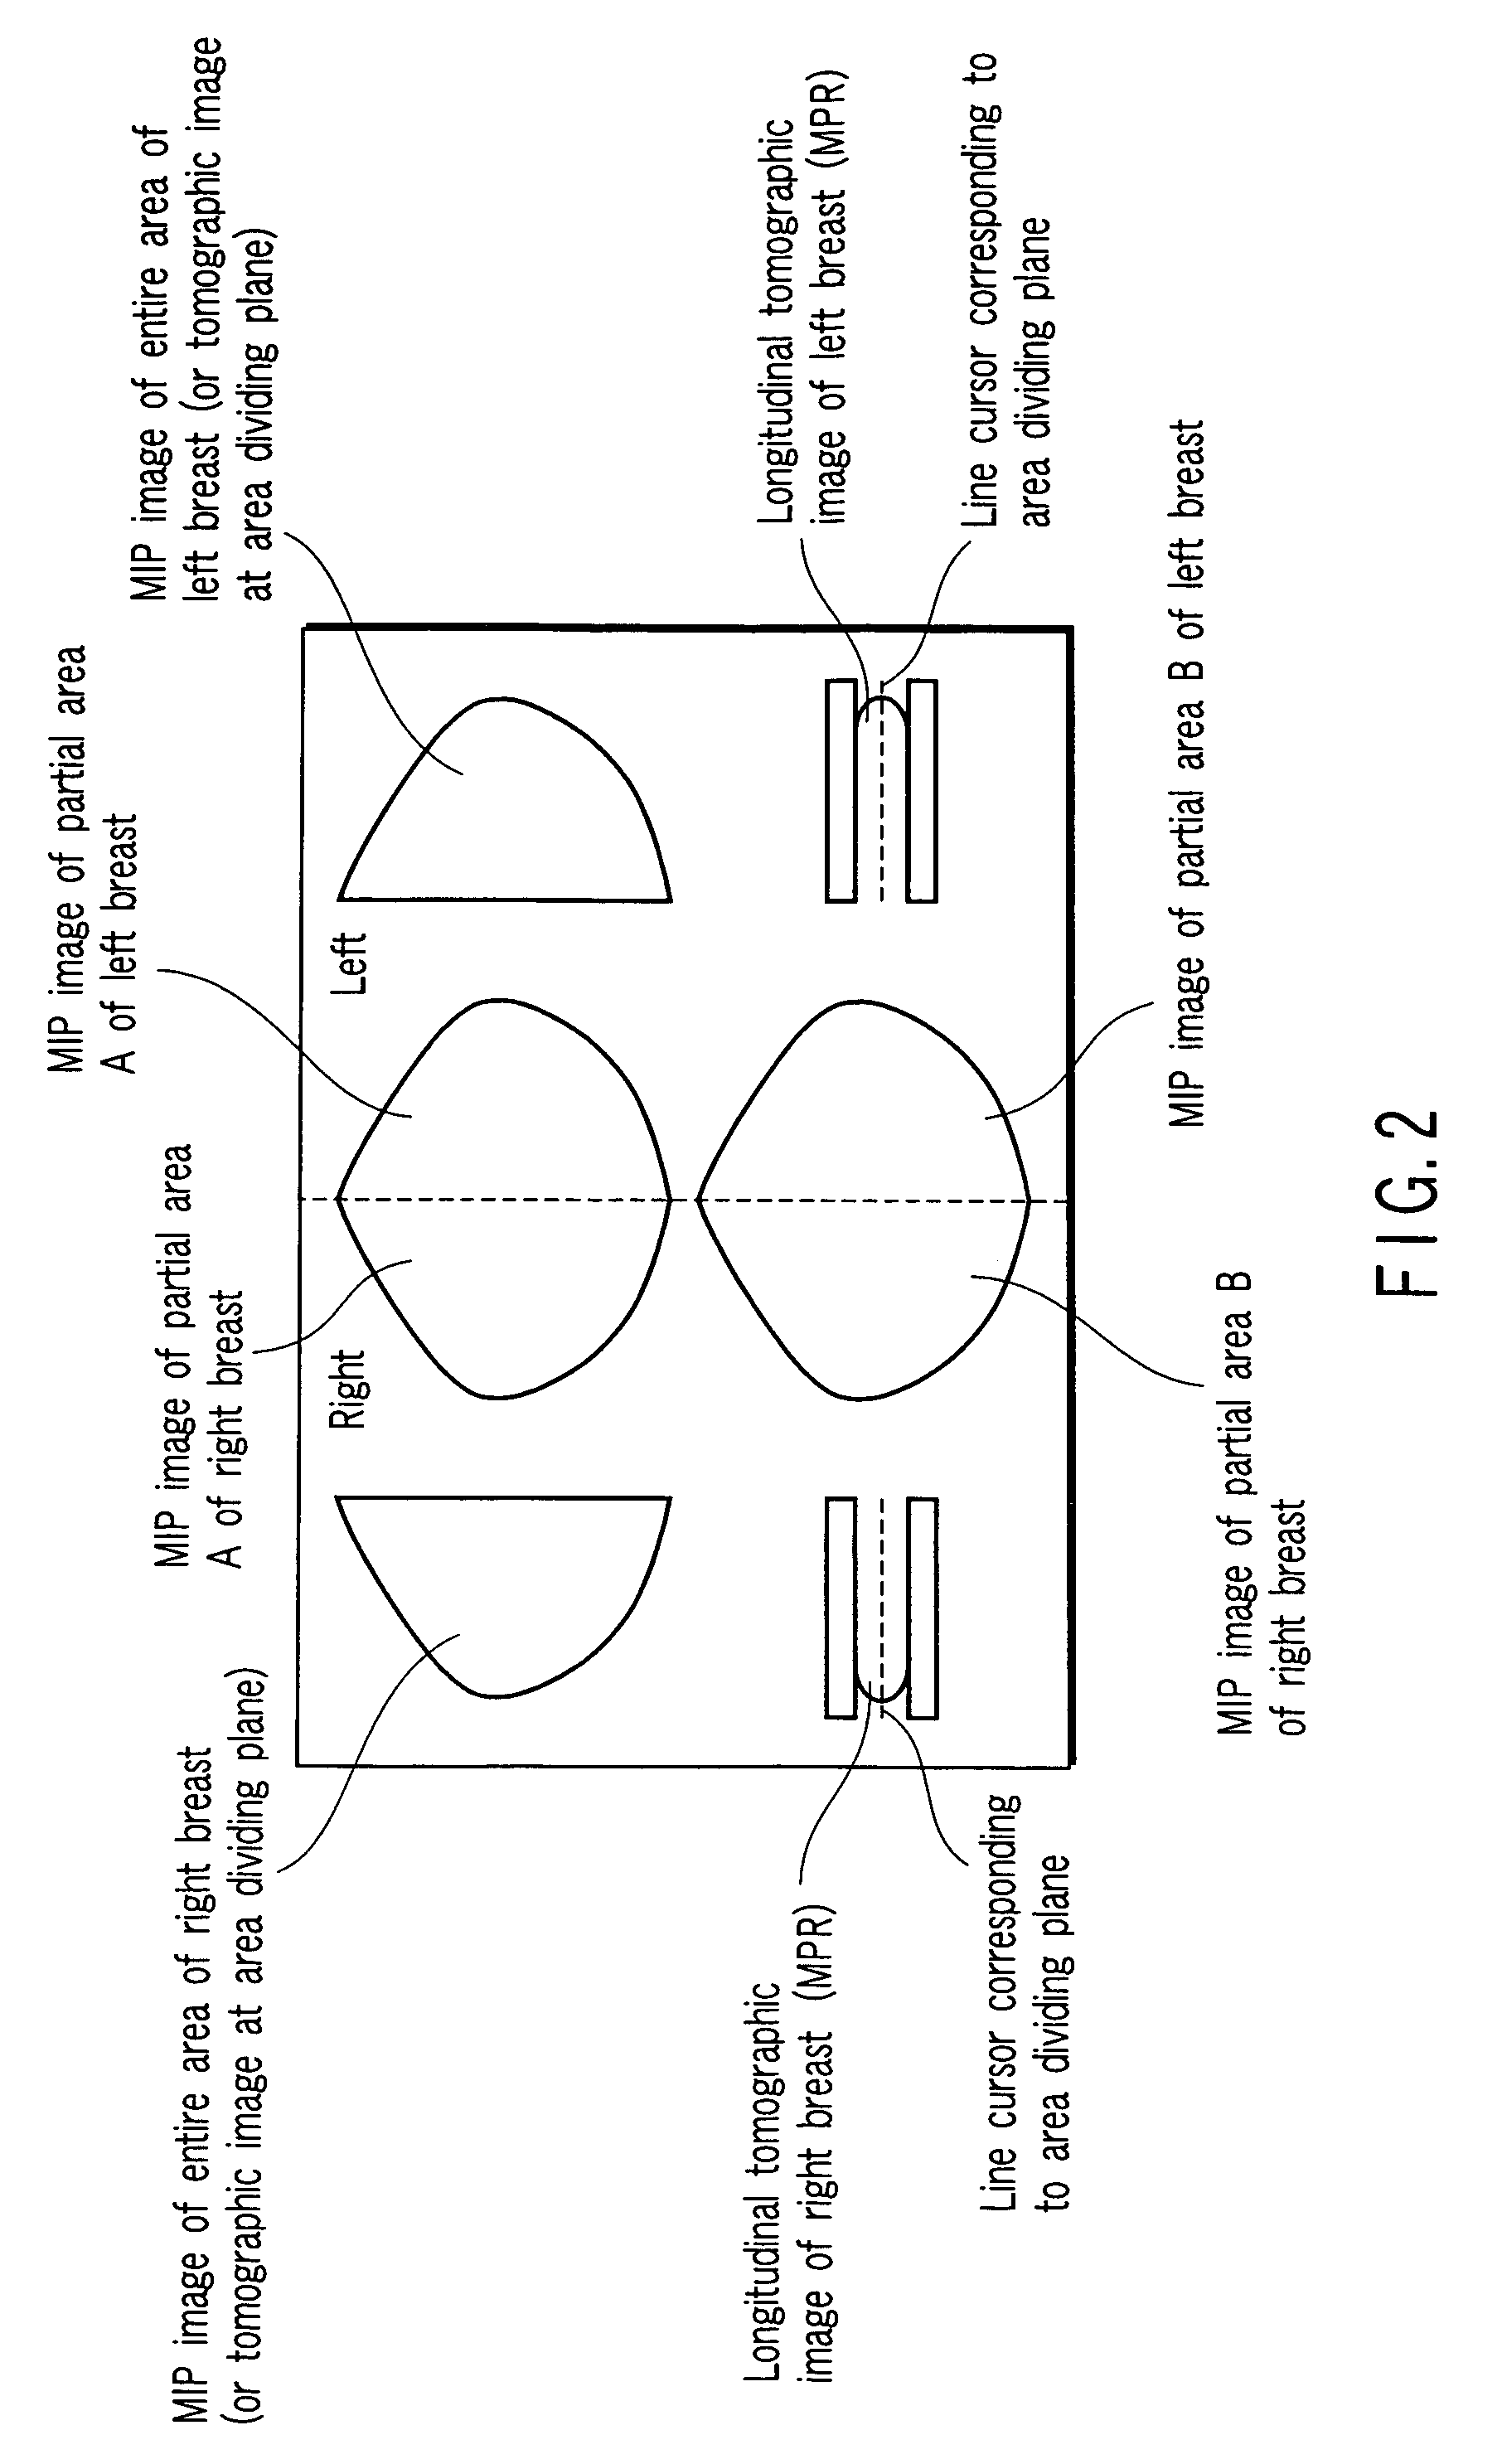 Image displaying apparatus, image displaying method, and computer readable medium for displaying an image of a mammary gland structure without overlaps thereof